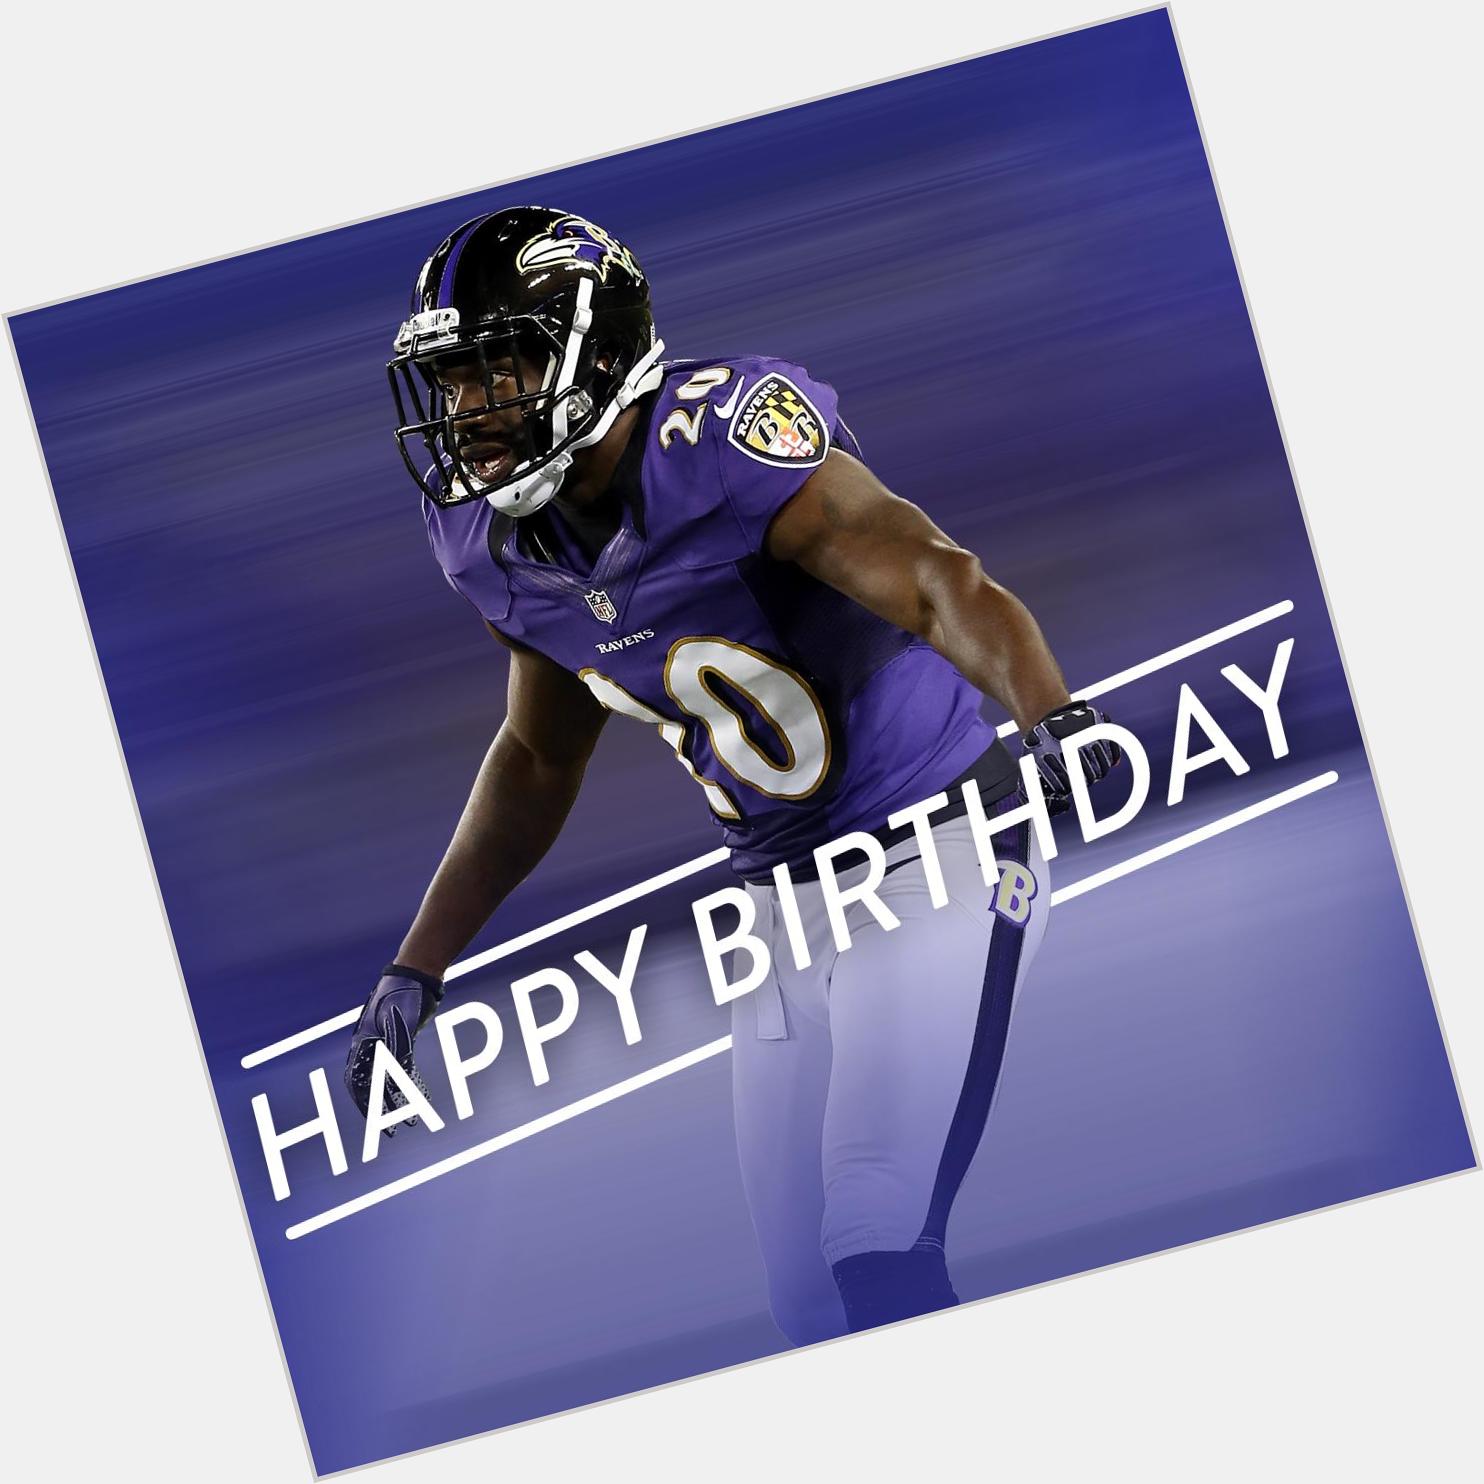 Ed Reed. The U. 9 Pro Bowls.
5x 1st-Team All-Pro.
37 years old.

Happy Birthday, 